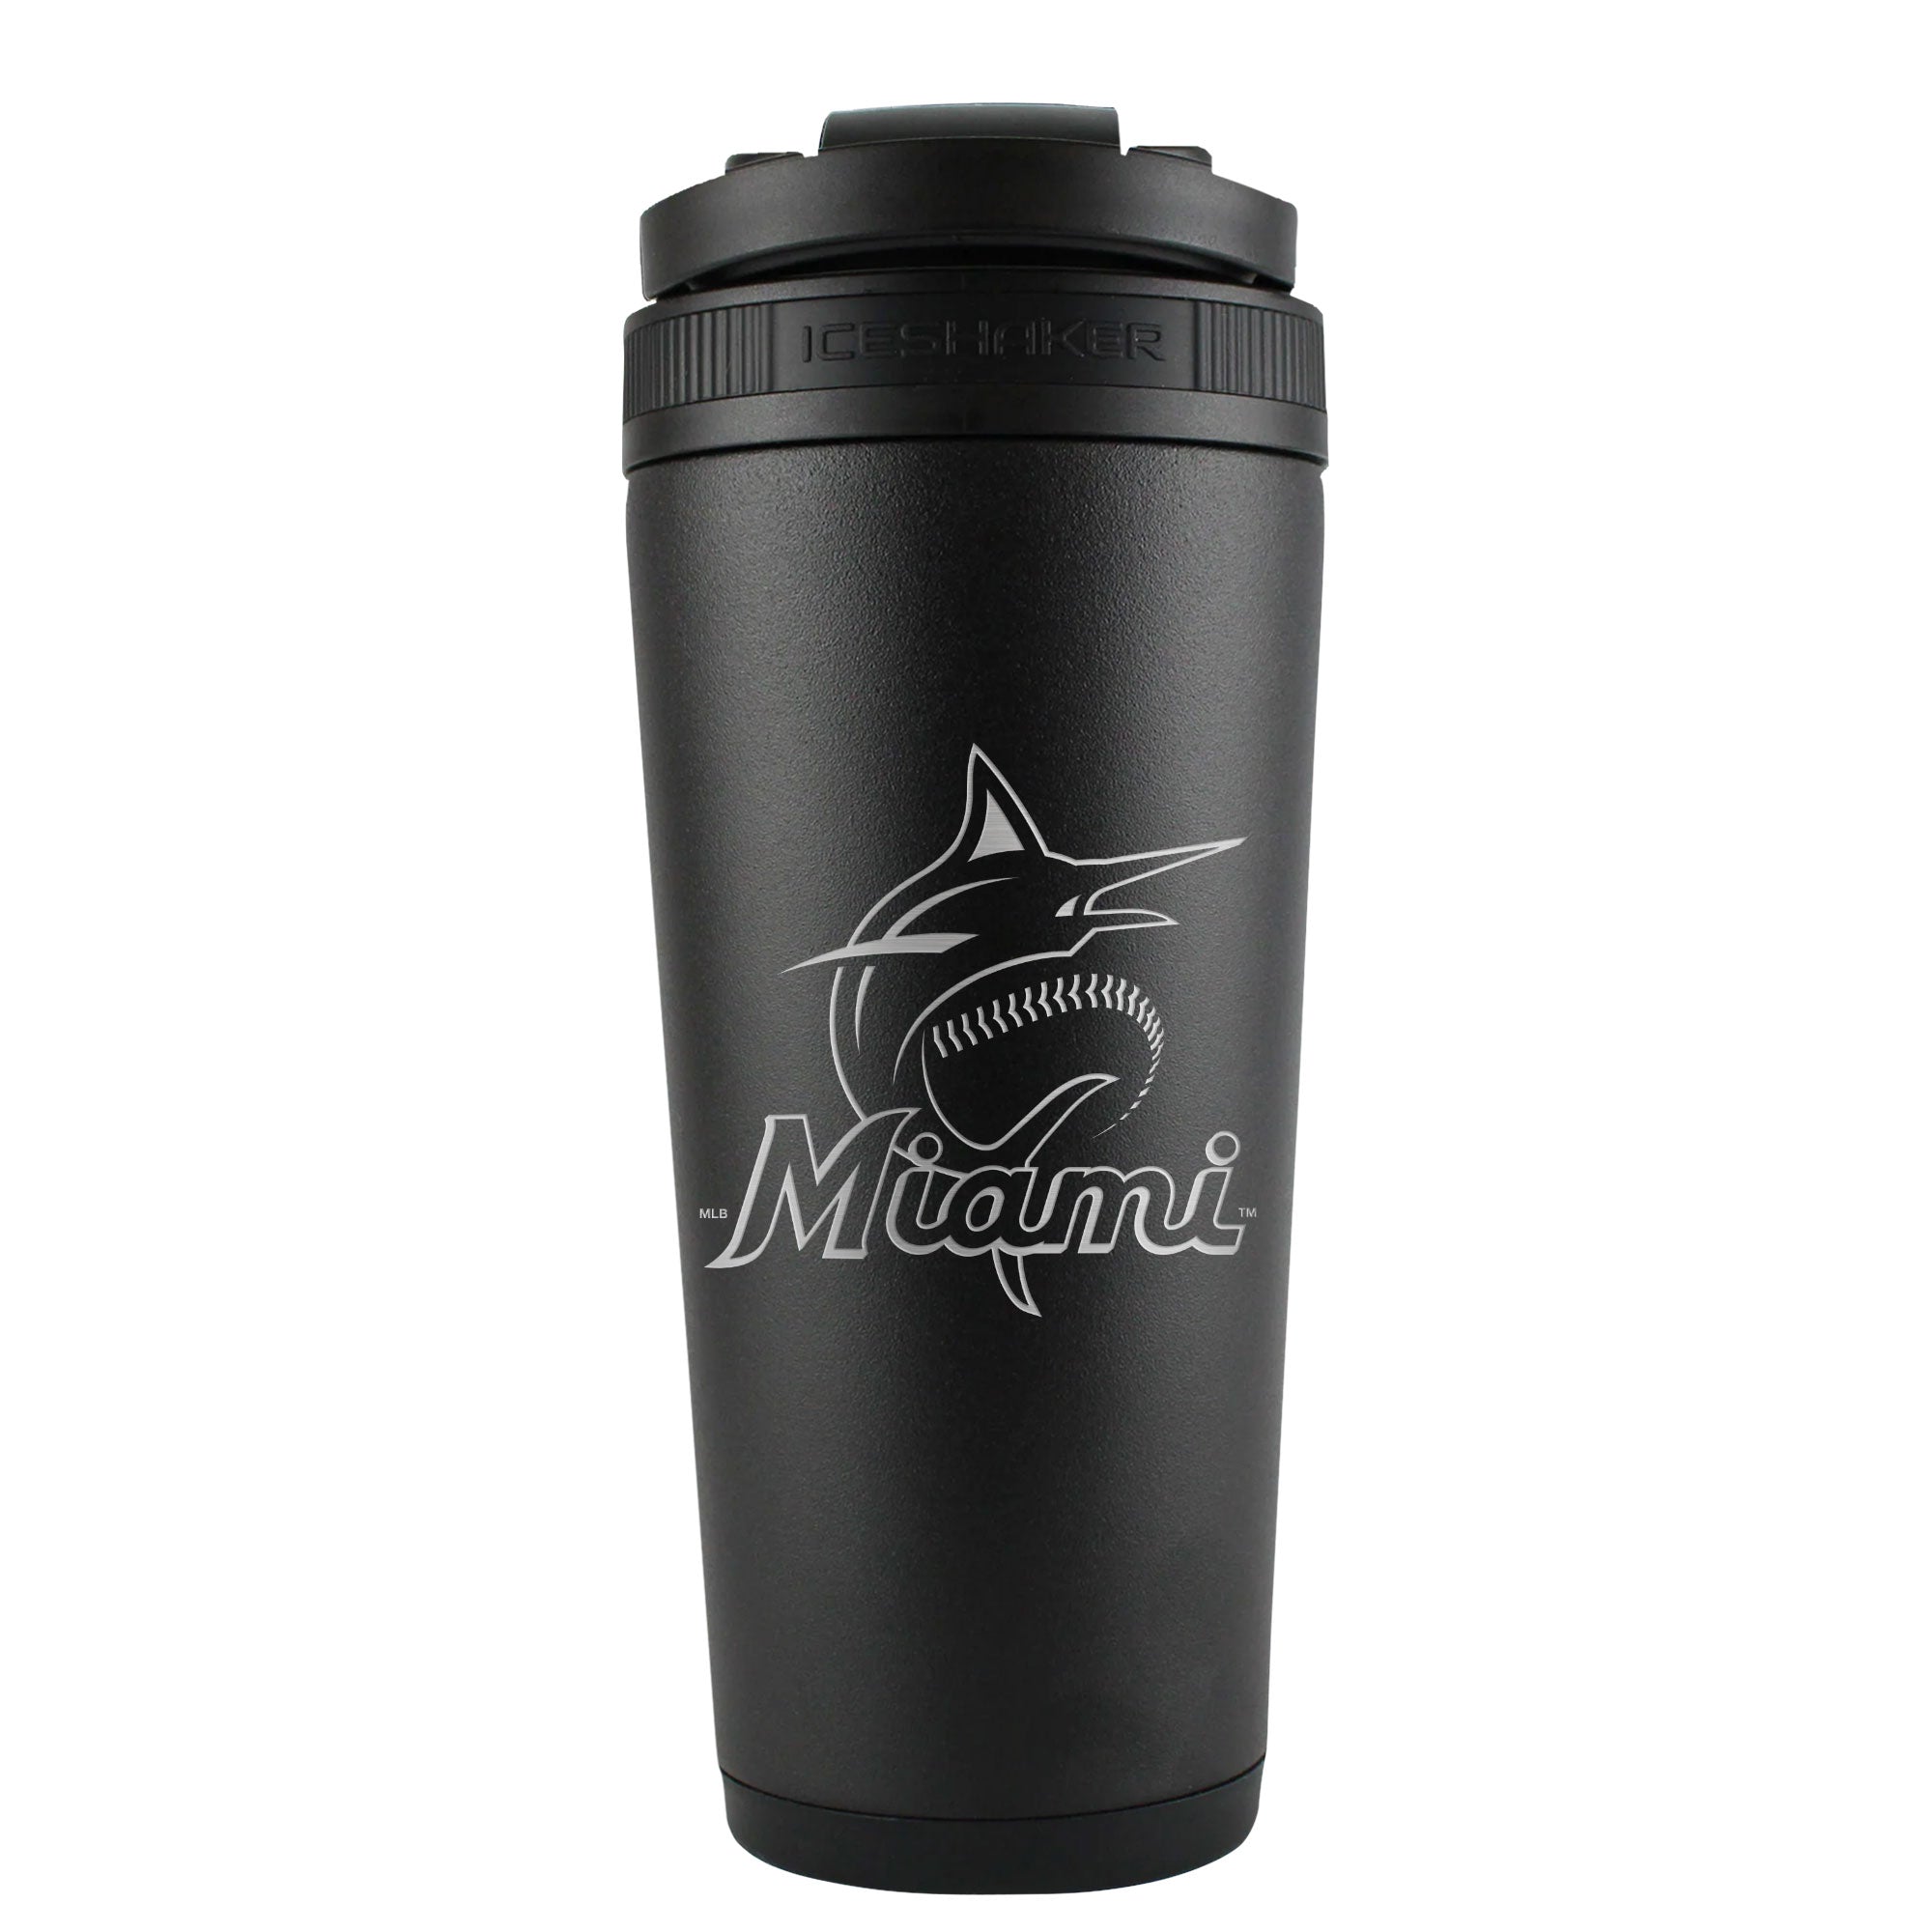 Officially Licensed Miami Marlins 26oz Ice Shaker - Black